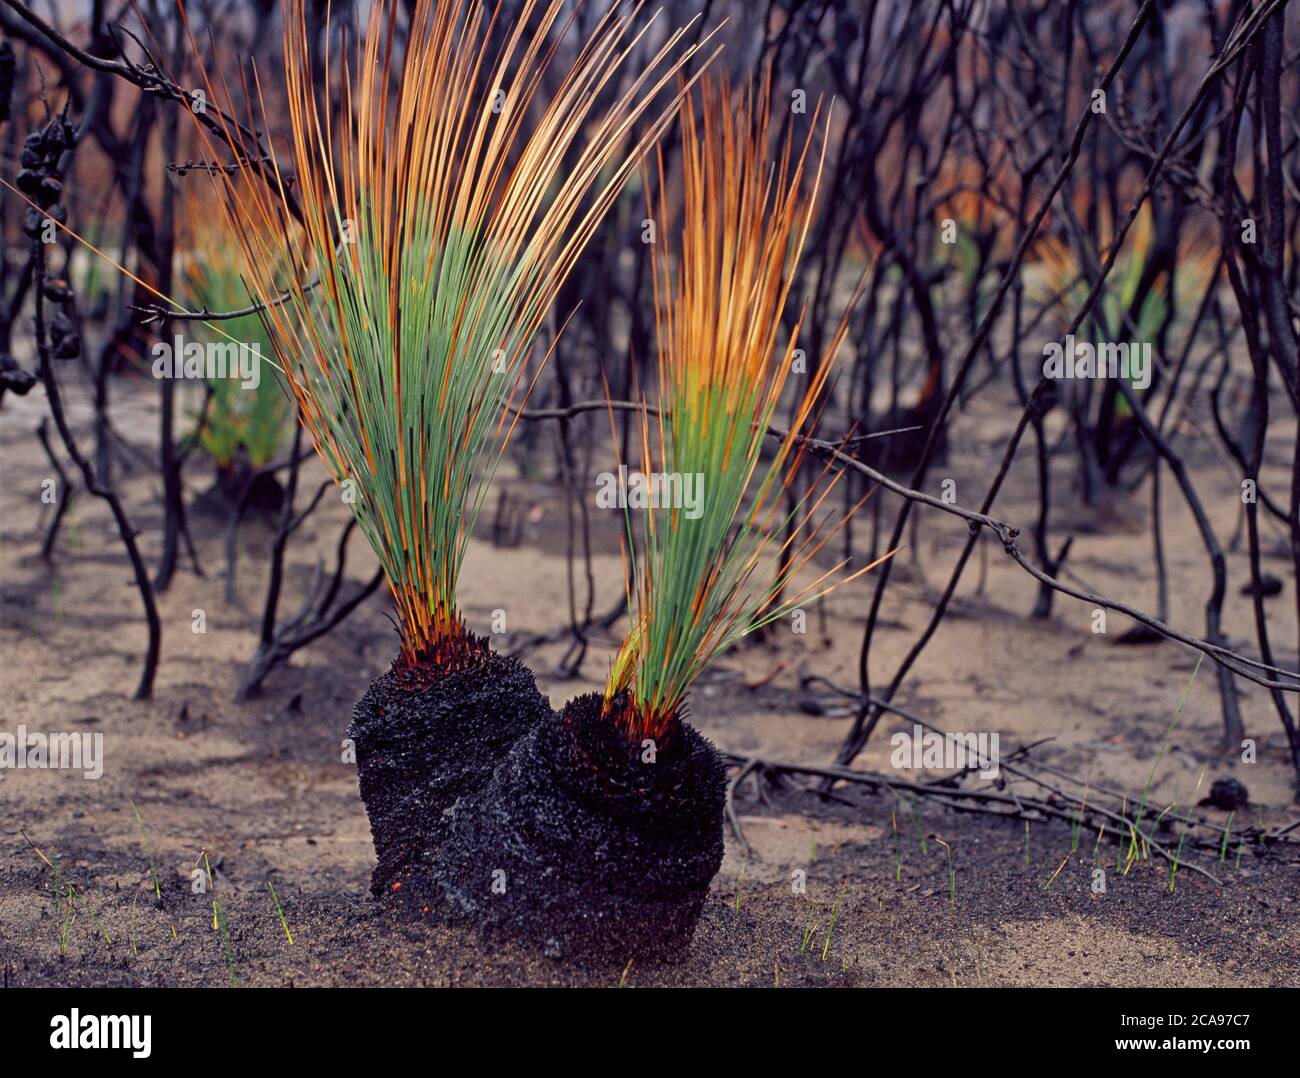 Burnt Grass Trees (Xanthorrhoea australis) regenerating after bush fires in New South Wales, Australia Stock Photo